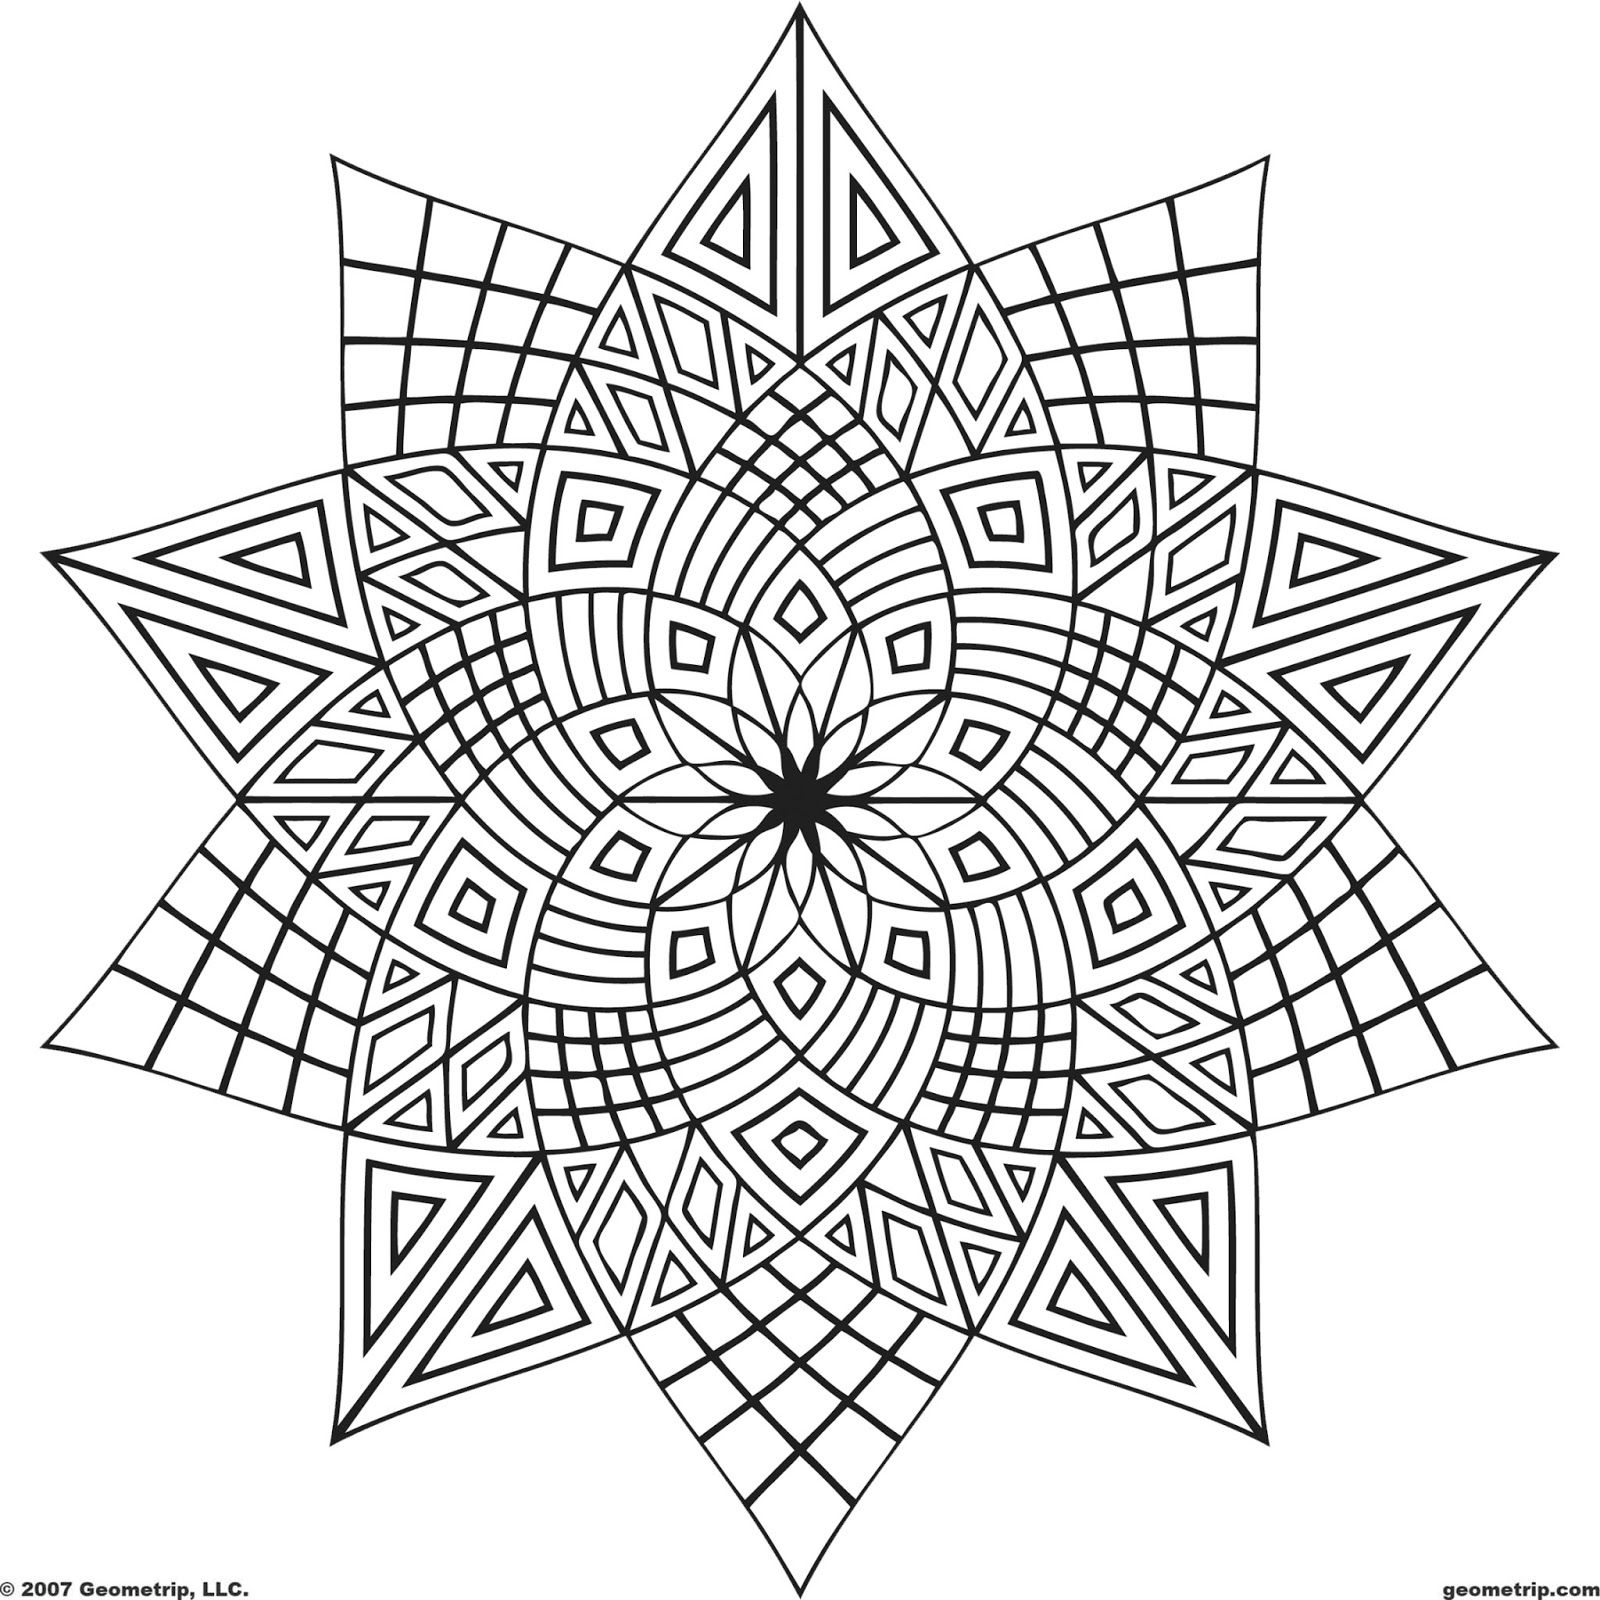 Amazing of Cool Coloring Pages For Teenagers At Coloring #3170